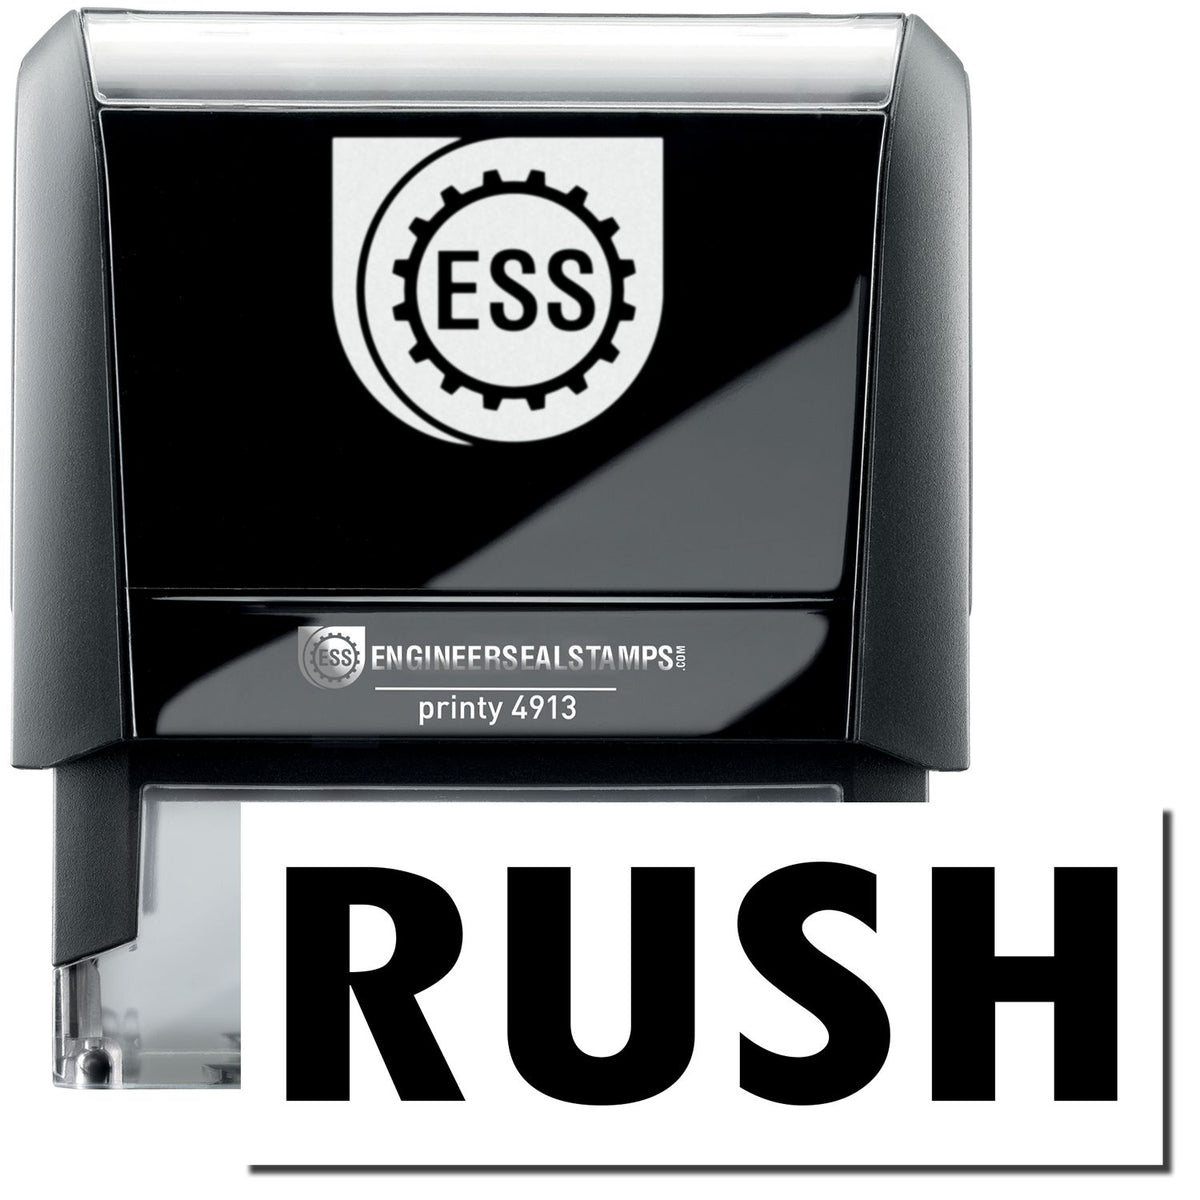 A self-inking stamp with a stamped image showing how the text &quot;RUSH&quot; in a large bold font is displayed by it.